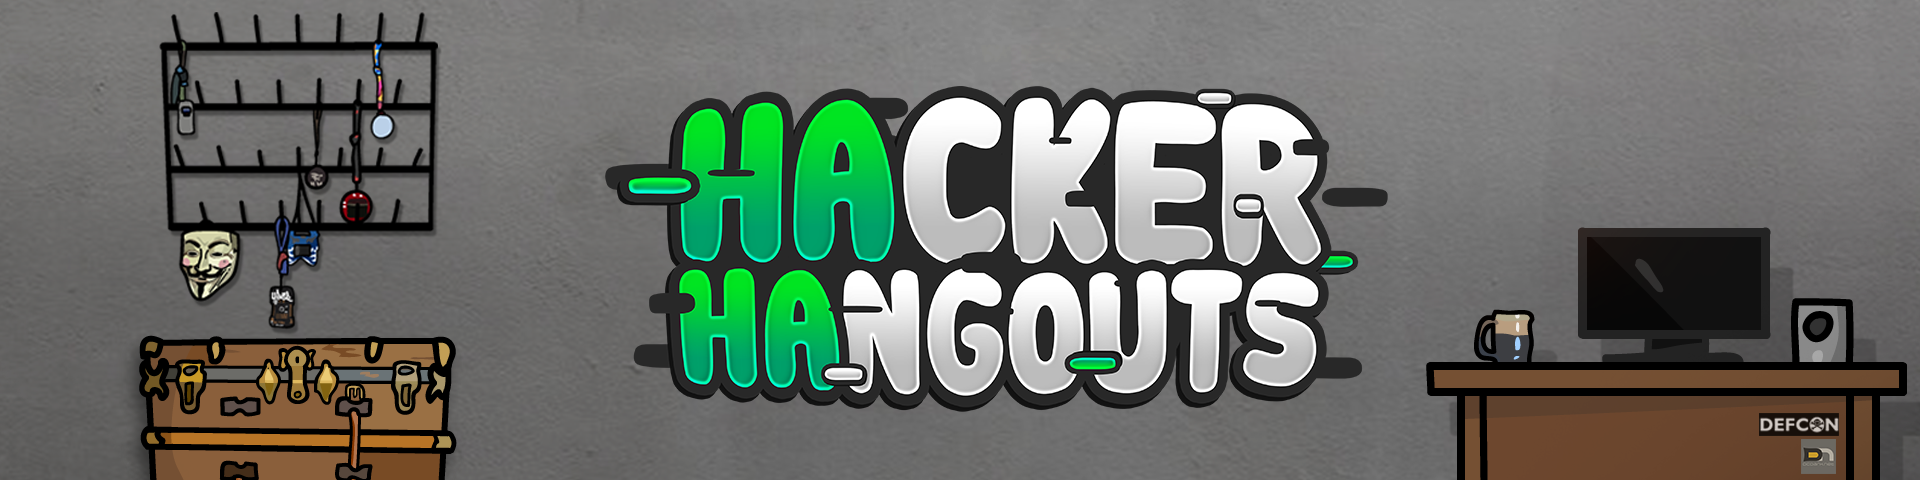 Hacker Hangouts banner showing Alex Chaveriat's Desk, Trunk, and Badge display in a cartoon like style with the Hacker Hangouts Logo in the middle